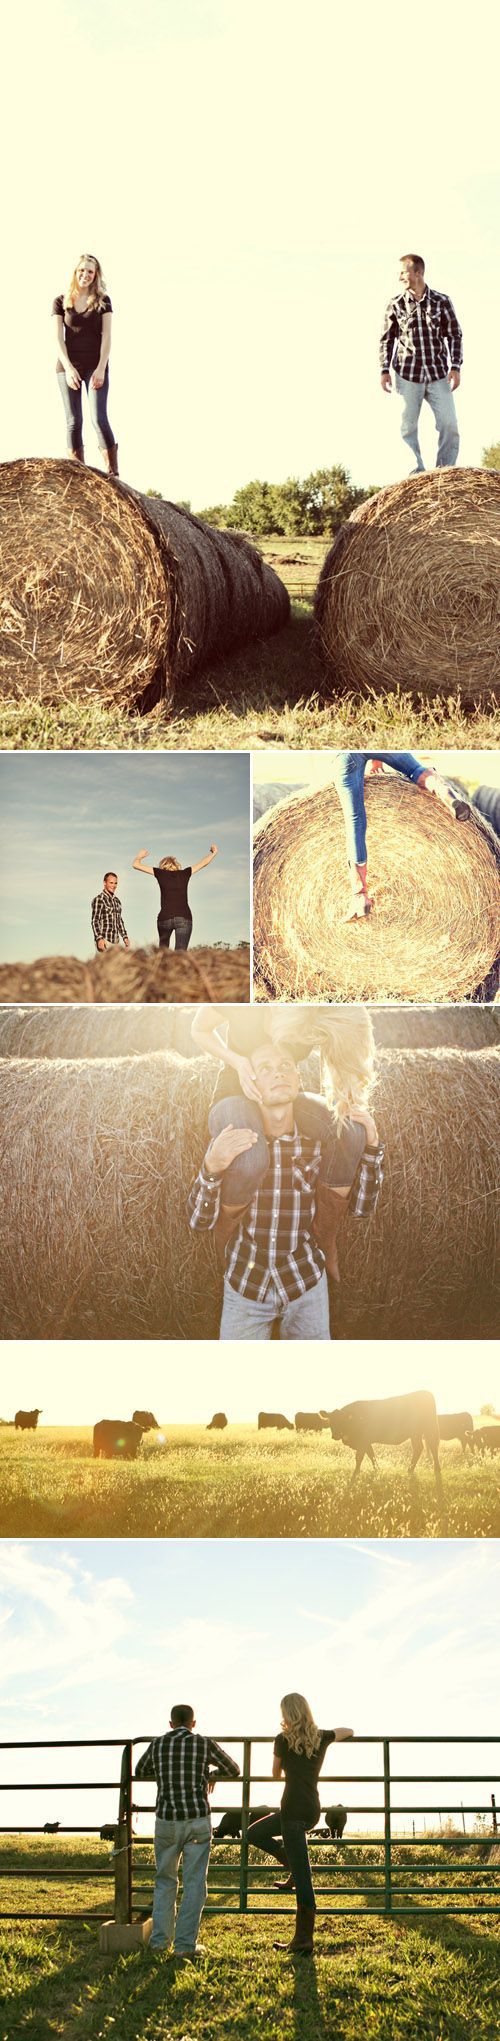 “down home”/country engagement pics – I think my friend Heather should take some